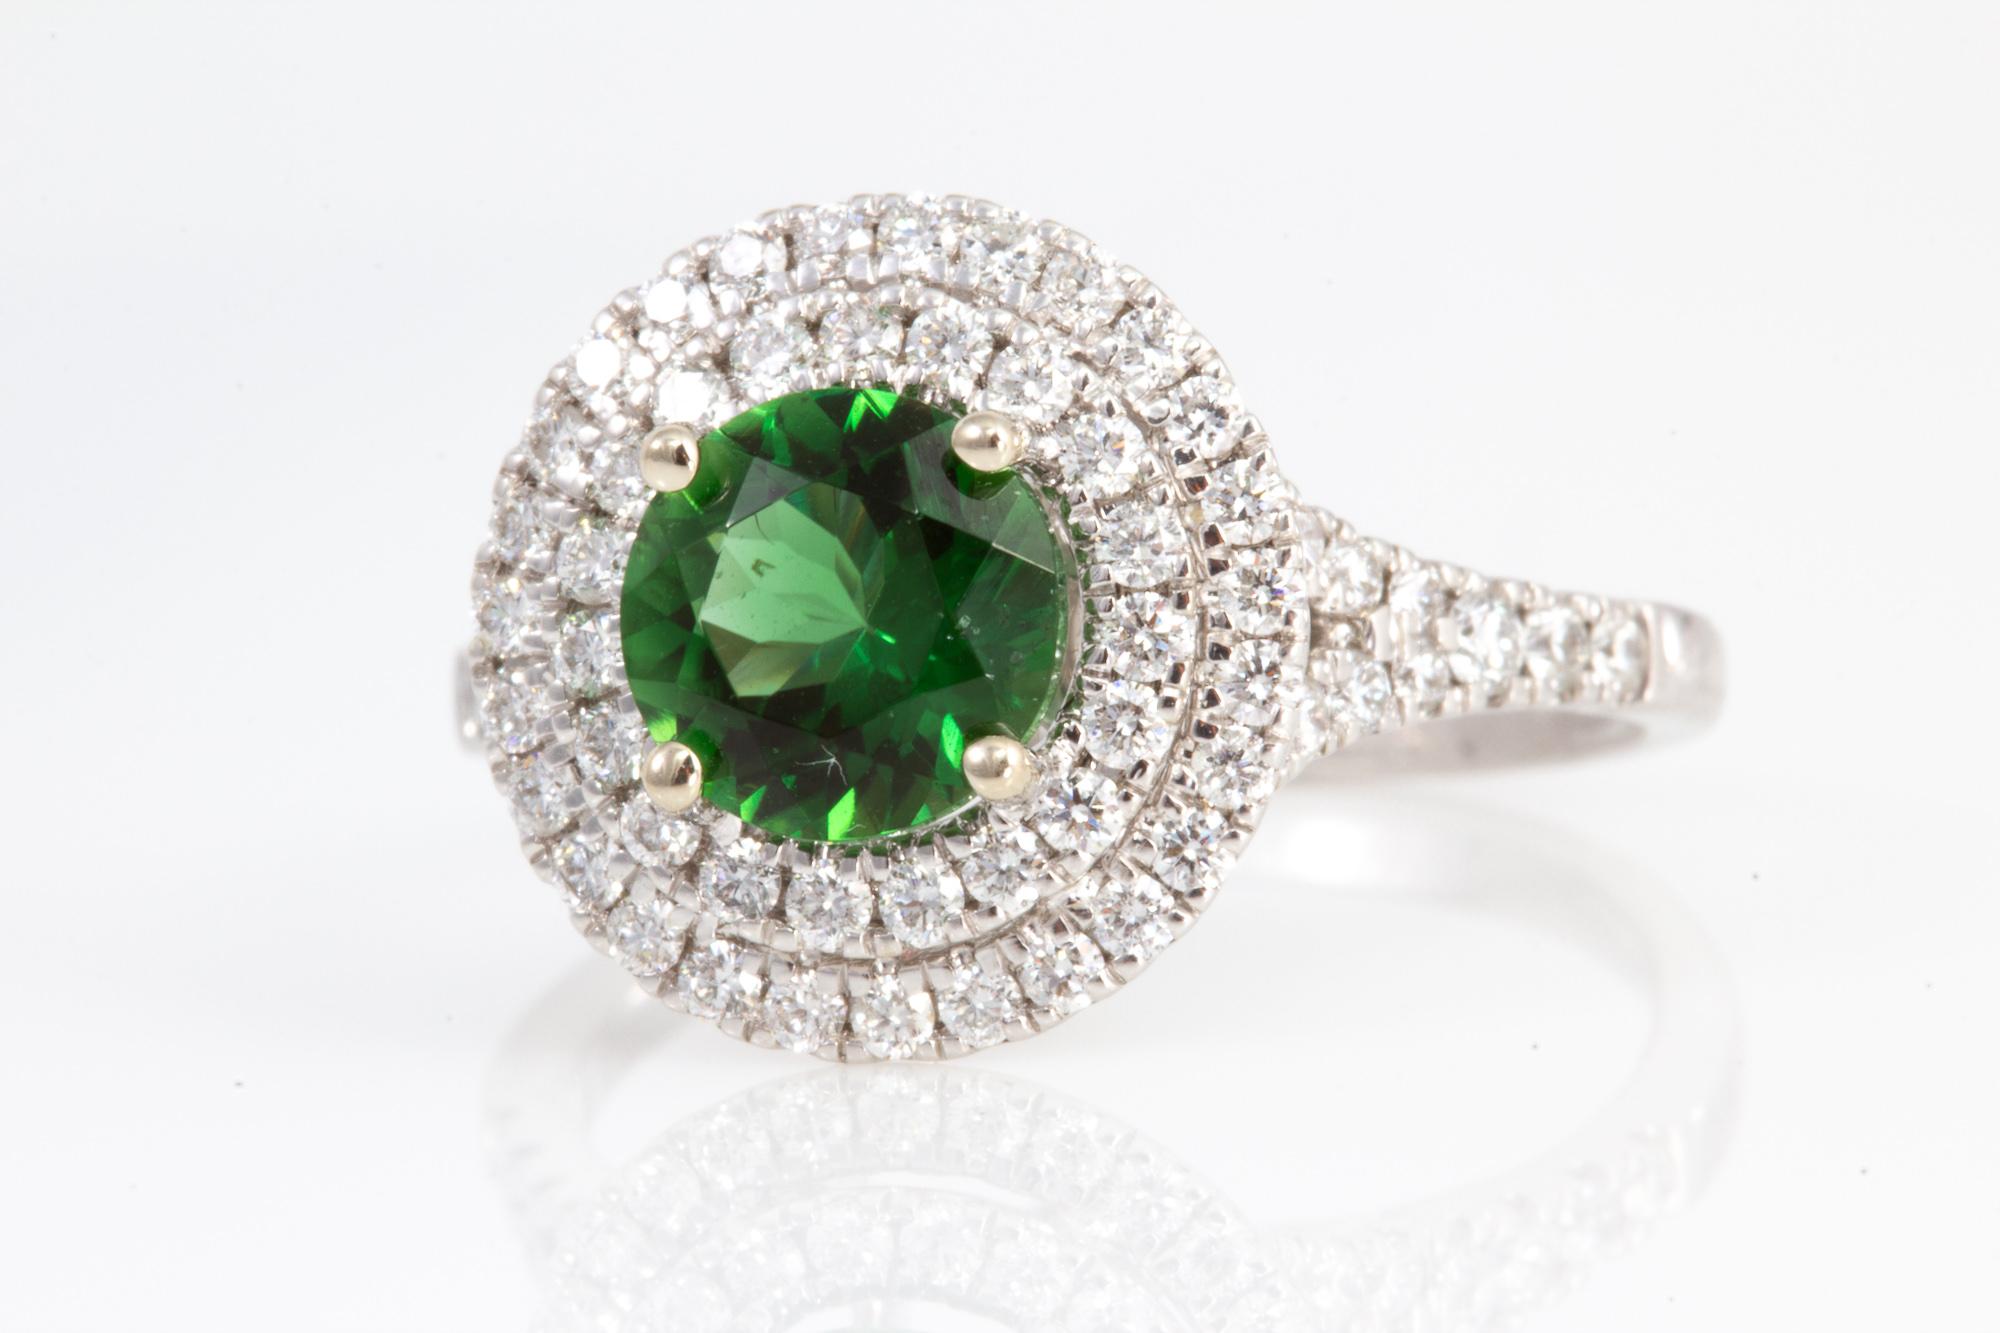 Exceptionally Well Cut 1.26 Carat Chrome Tourmaline and Diamond Ring For Sale 3